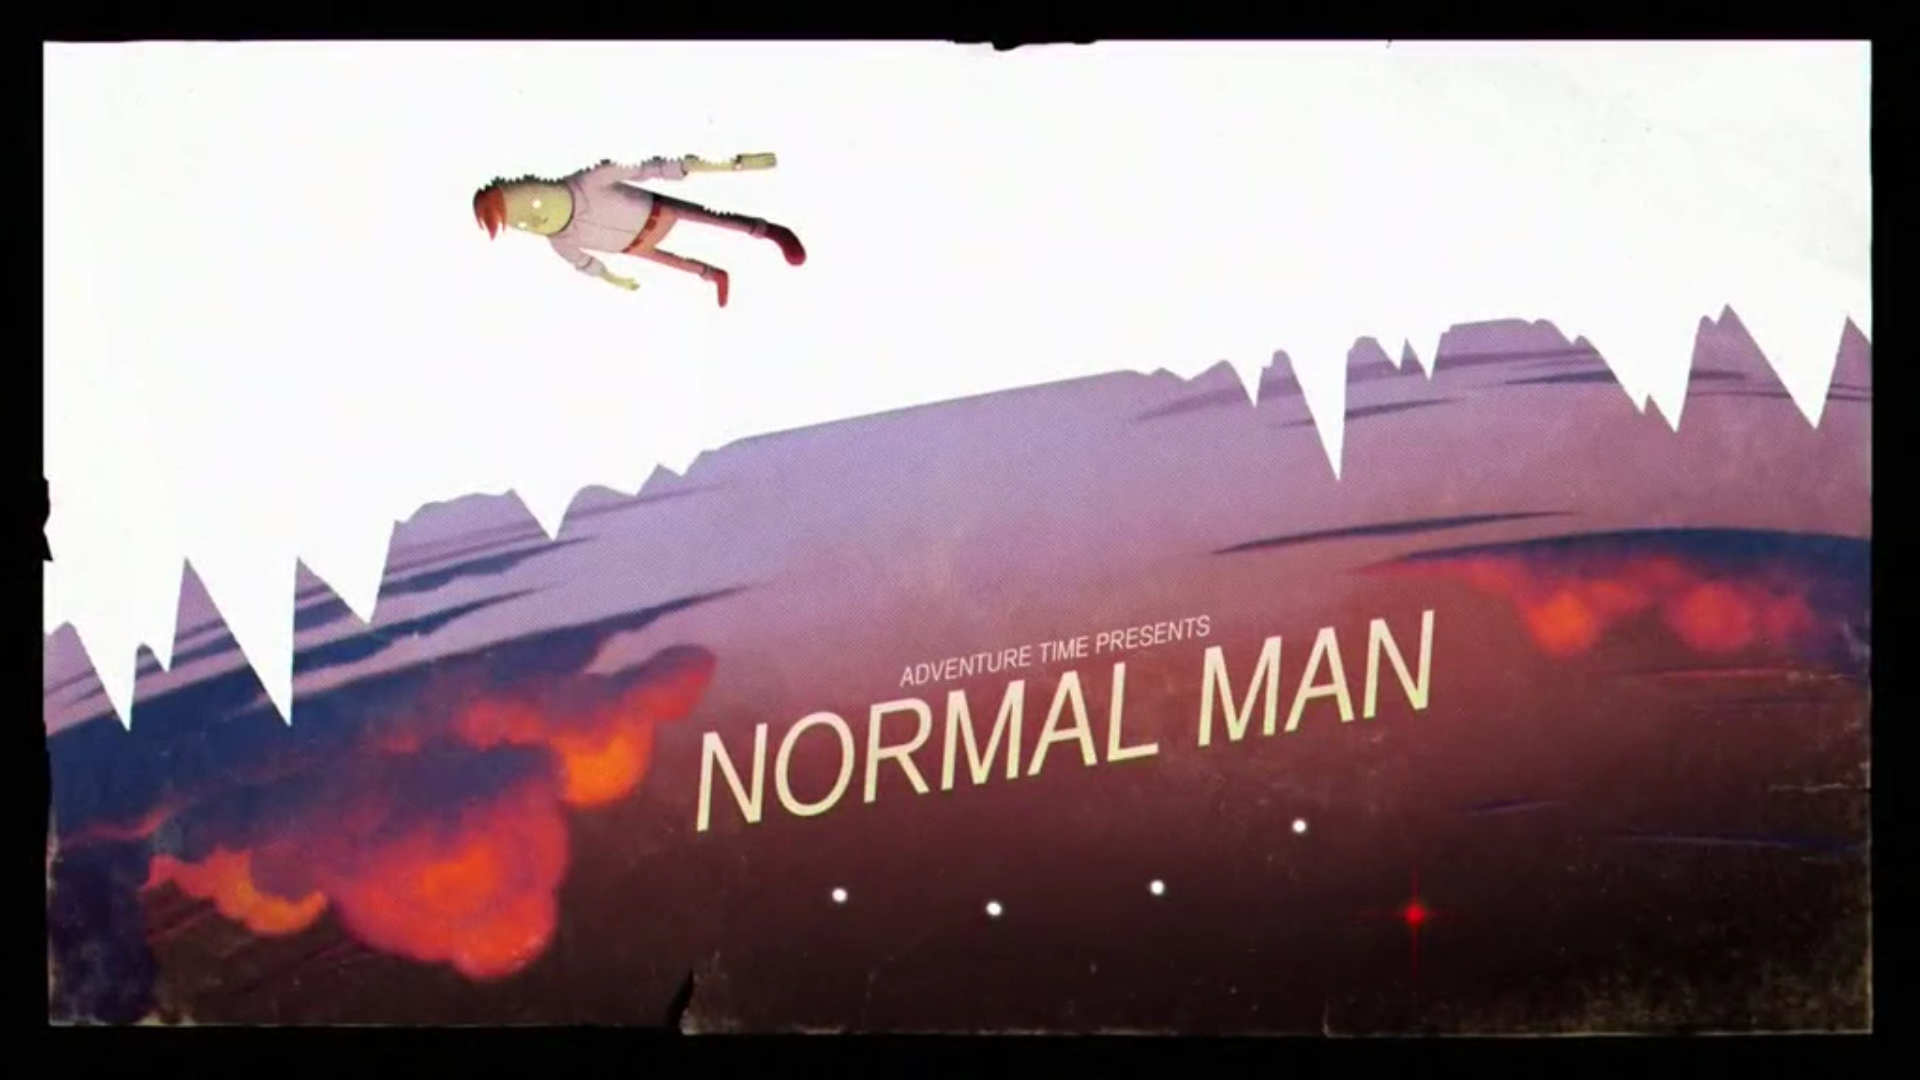 titlecard for the episode "Normal Man"